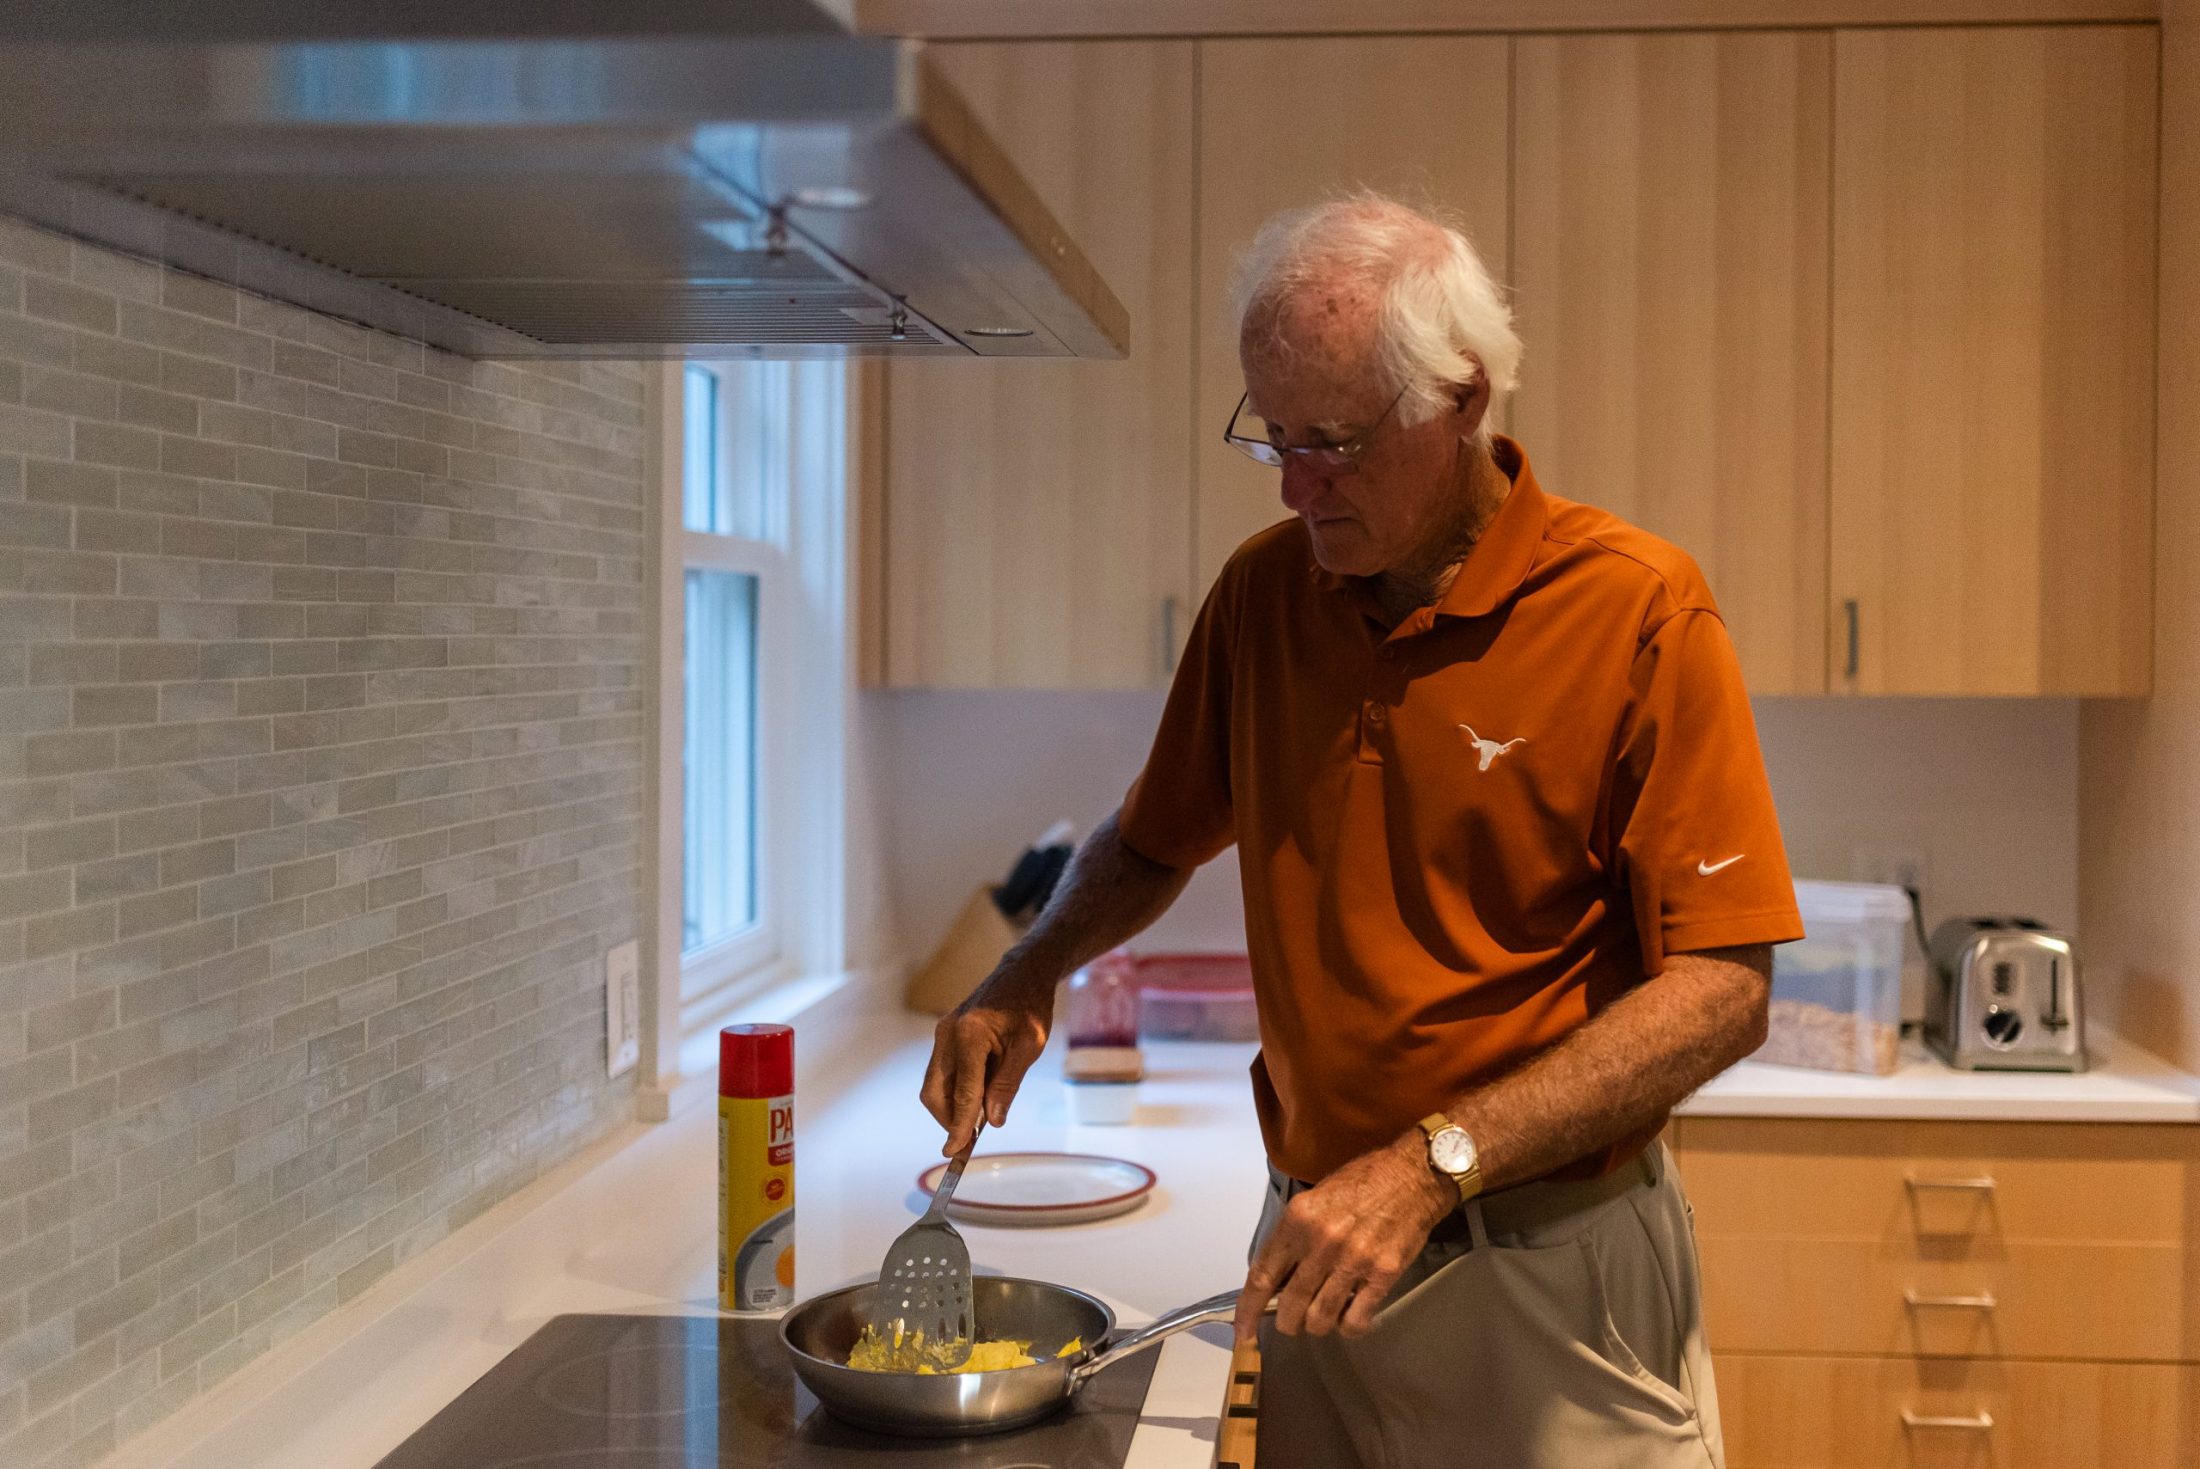 Father of DC widow blog writer Marjorie Brimley cooks egg in kitchen